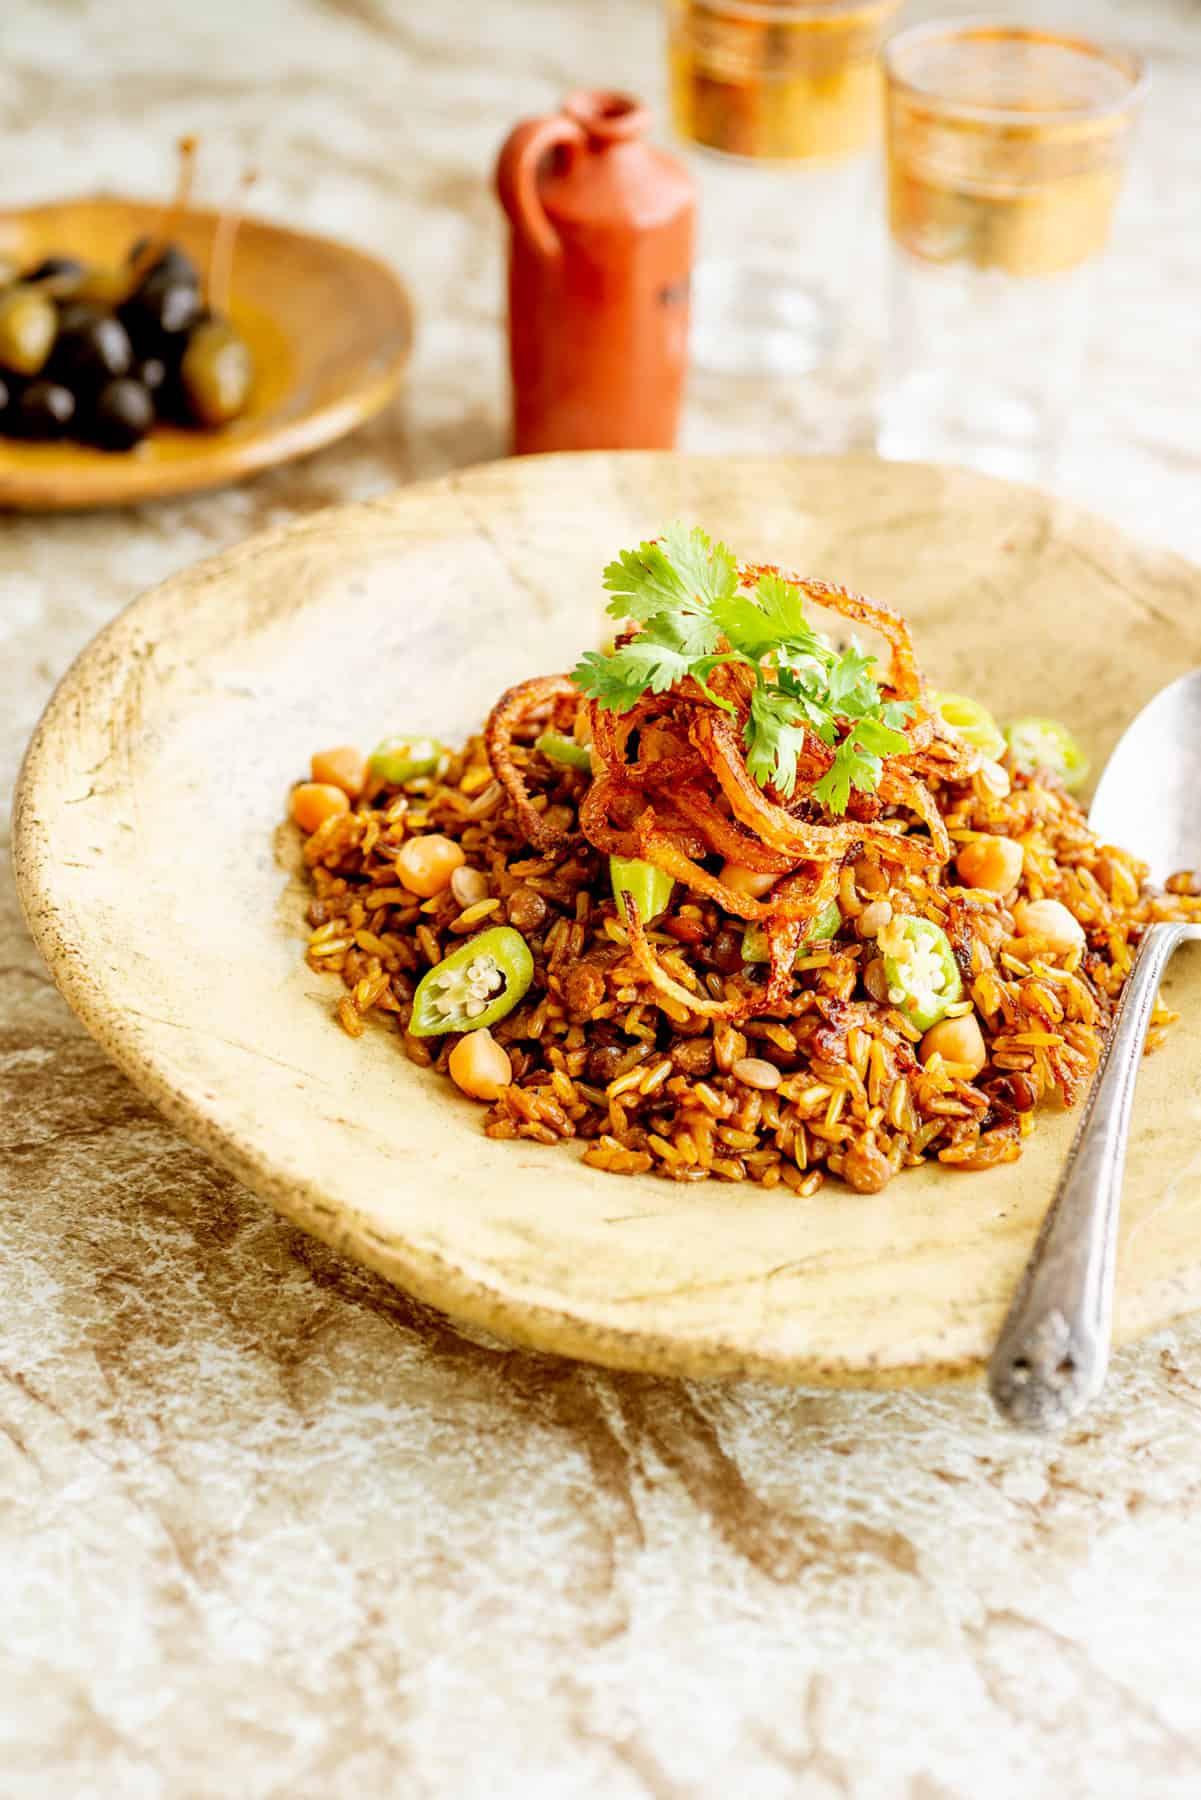 Mejadra rice with lentils and onion.